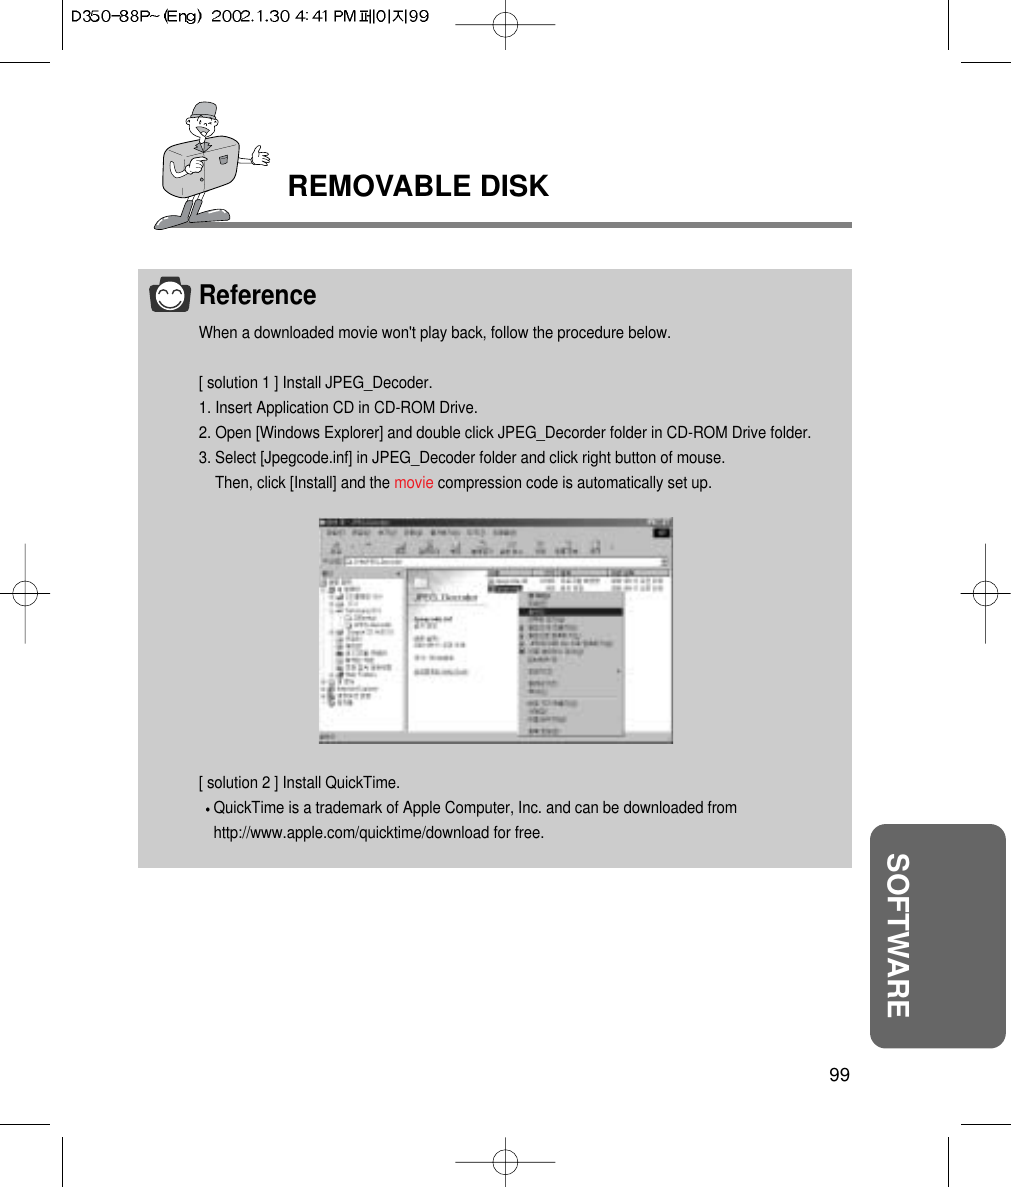 99SOFTWAREREMOVABLE DISKReferenceWhen a downloaded movie won&apos;t play back, follow the procedure below. [ solution 1 ] Install JPEG_Decoder.1. Insert Application CD in CD-ROM Drive.2. Open [Windows Explorer] and double click JPEG_Decorder folder in CD-ROM Drive folder.3. Select [Jpegcode.inf] in JPEG_Decoder folder and click right button of mouse.Then, click [Install] and the movie compression code is automatically set up.[ solution 2 ] Install QuickTime.QuickTime is a trademark of Apple Computer, Inc. and can be downloaded from http://www.apple.com/quicktime/download for free.